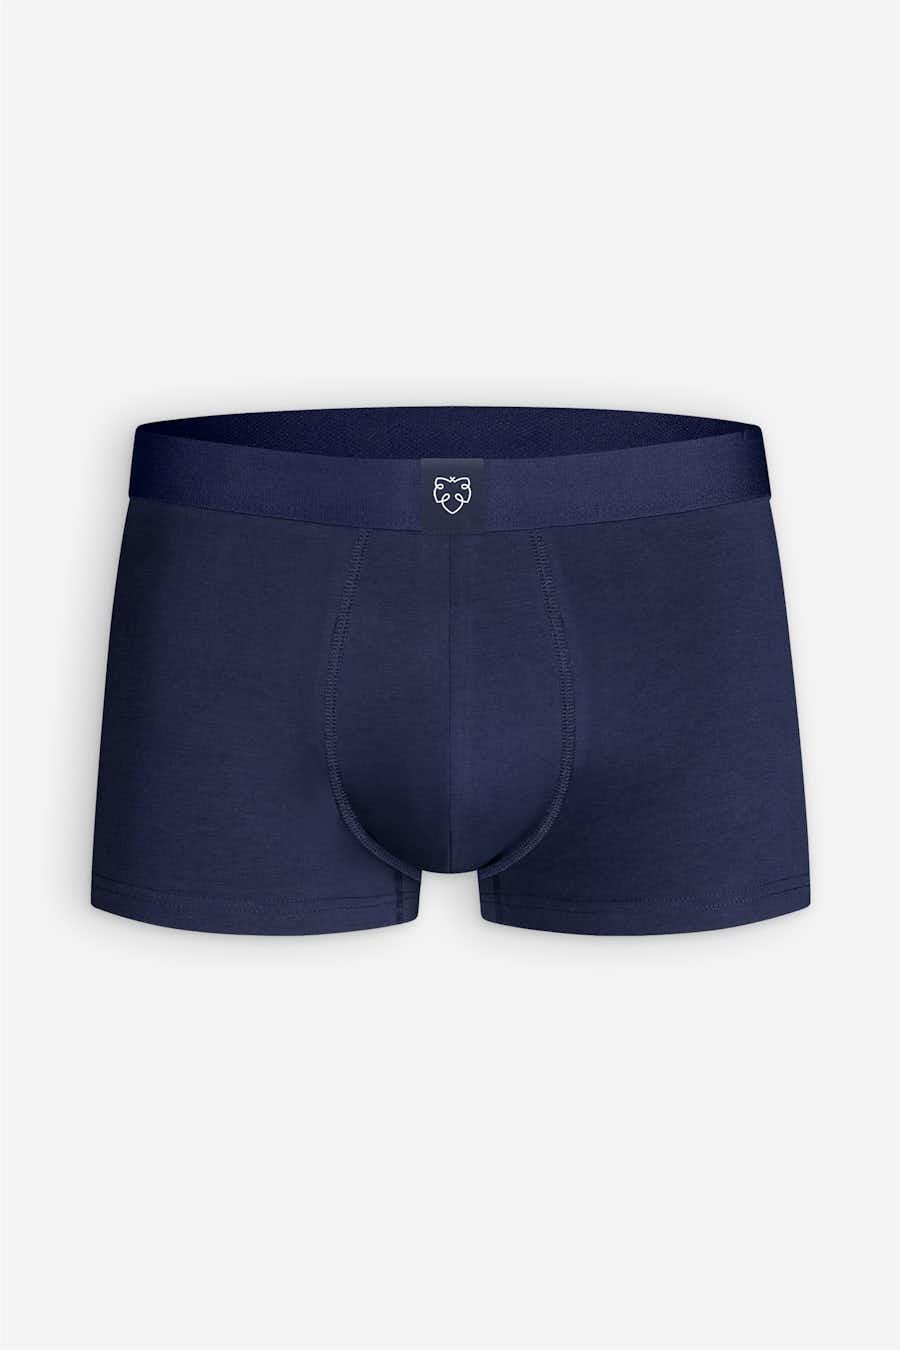 Solid Navy Trunks